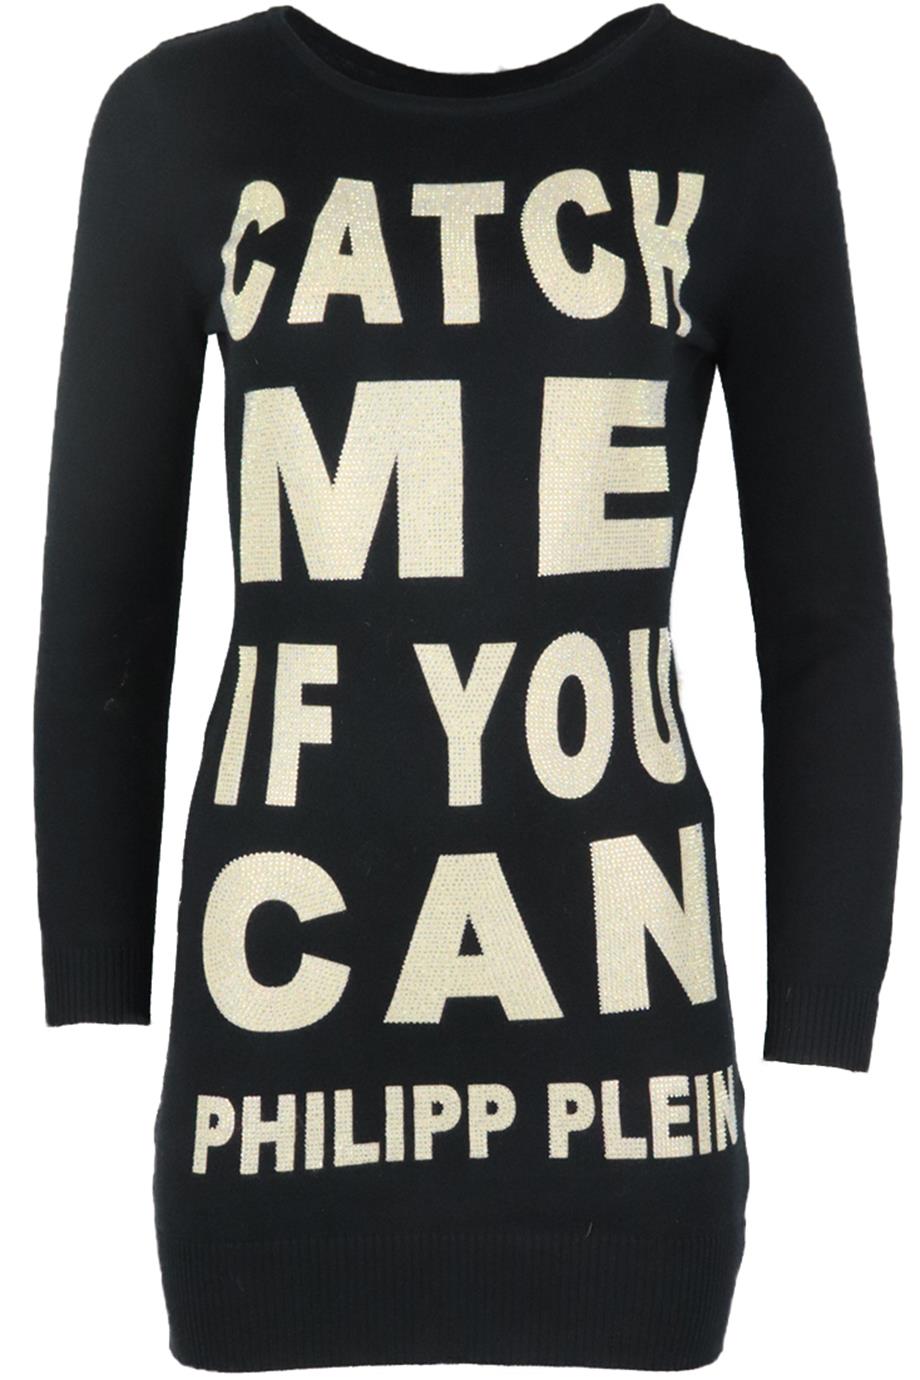 PHILIPP PLEIN COUTURE CRYSTAL EMBELLISHED KNITTED MINI DRESS SMALL